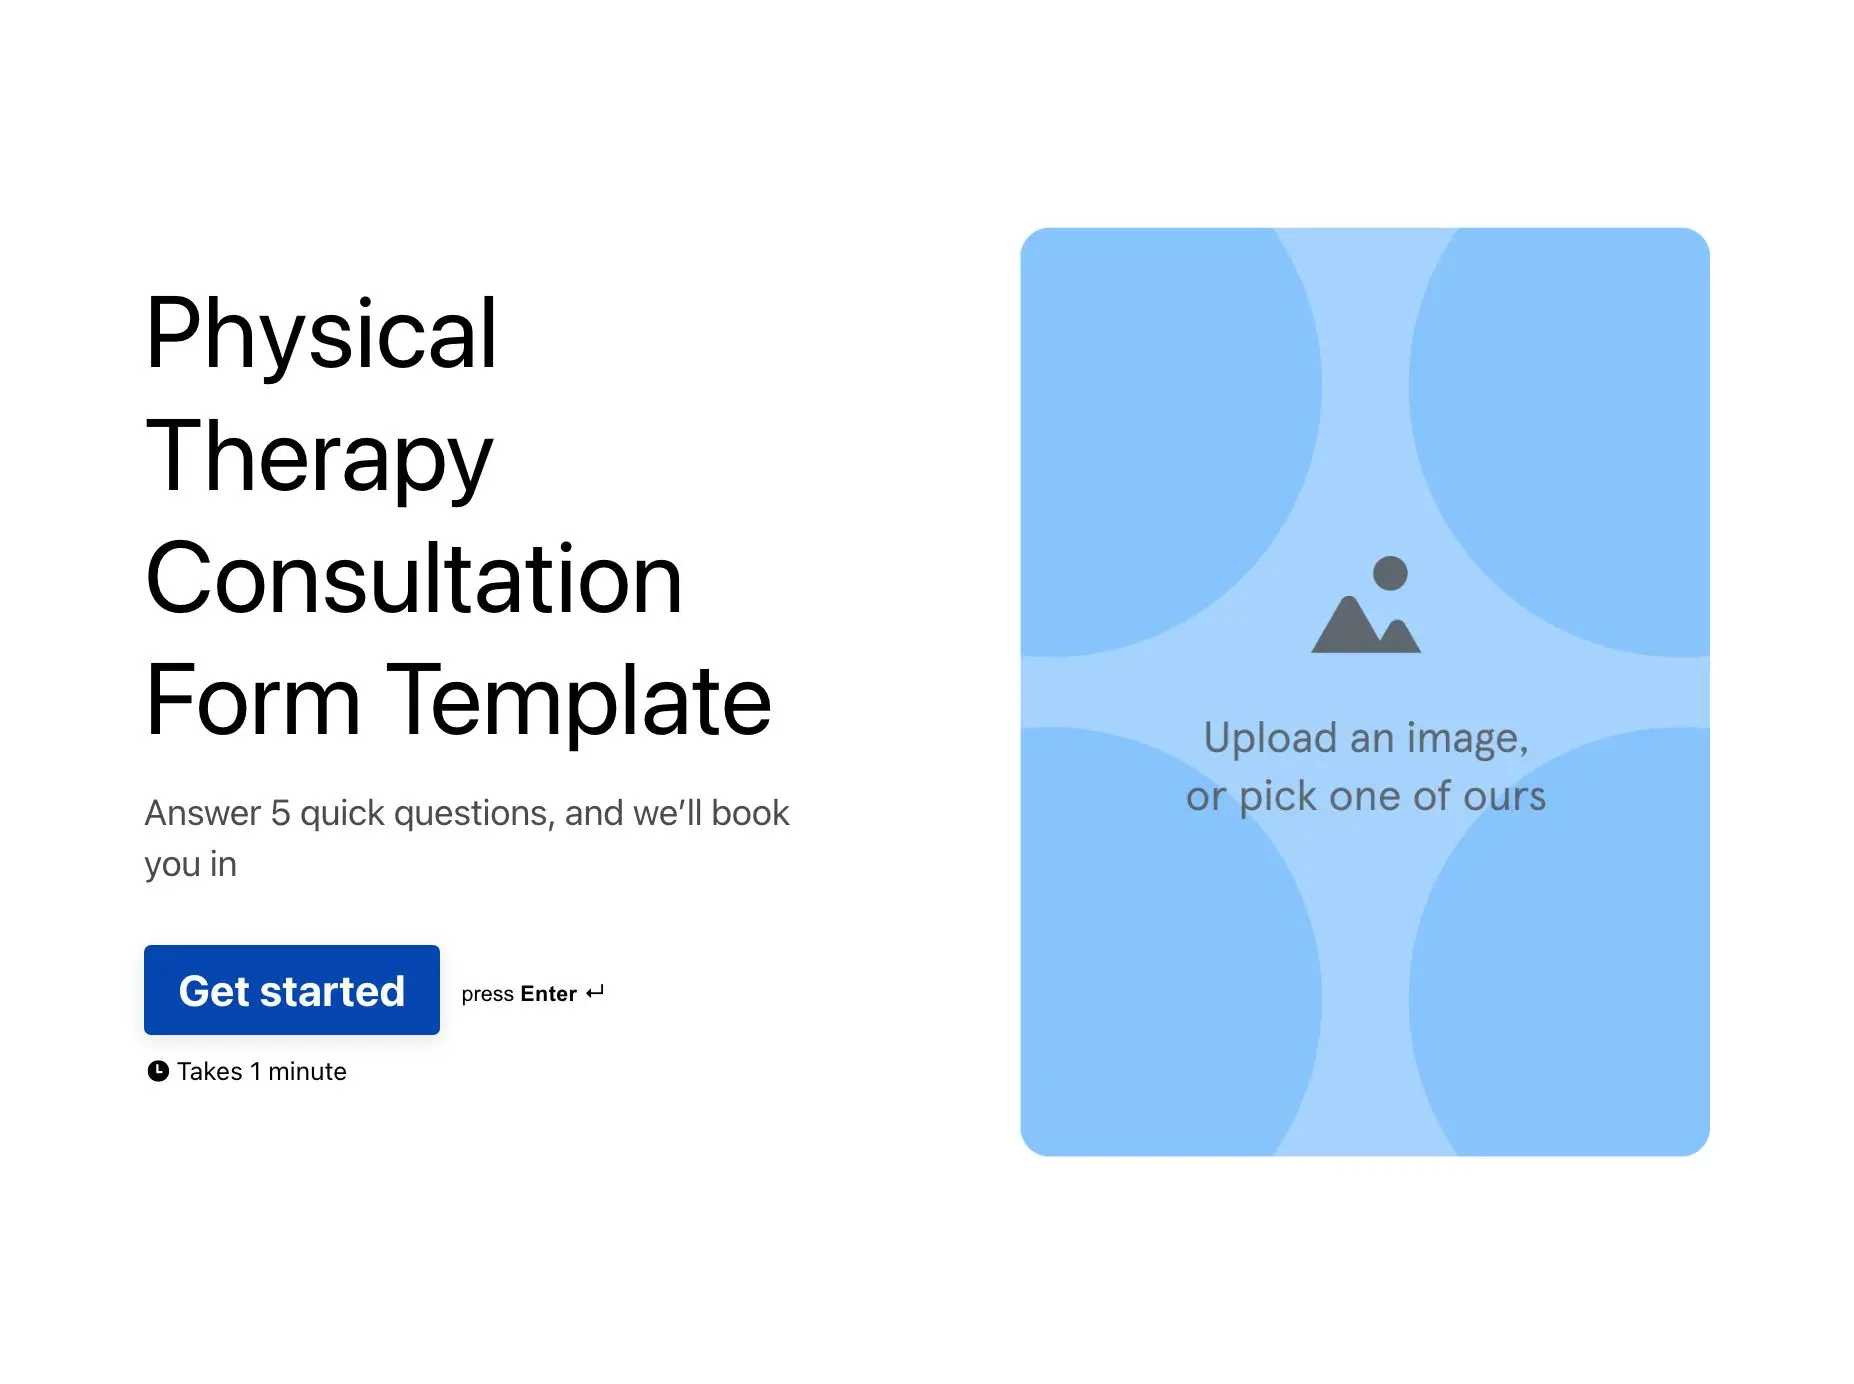 Physical Therapy Consultation Form Template Hero